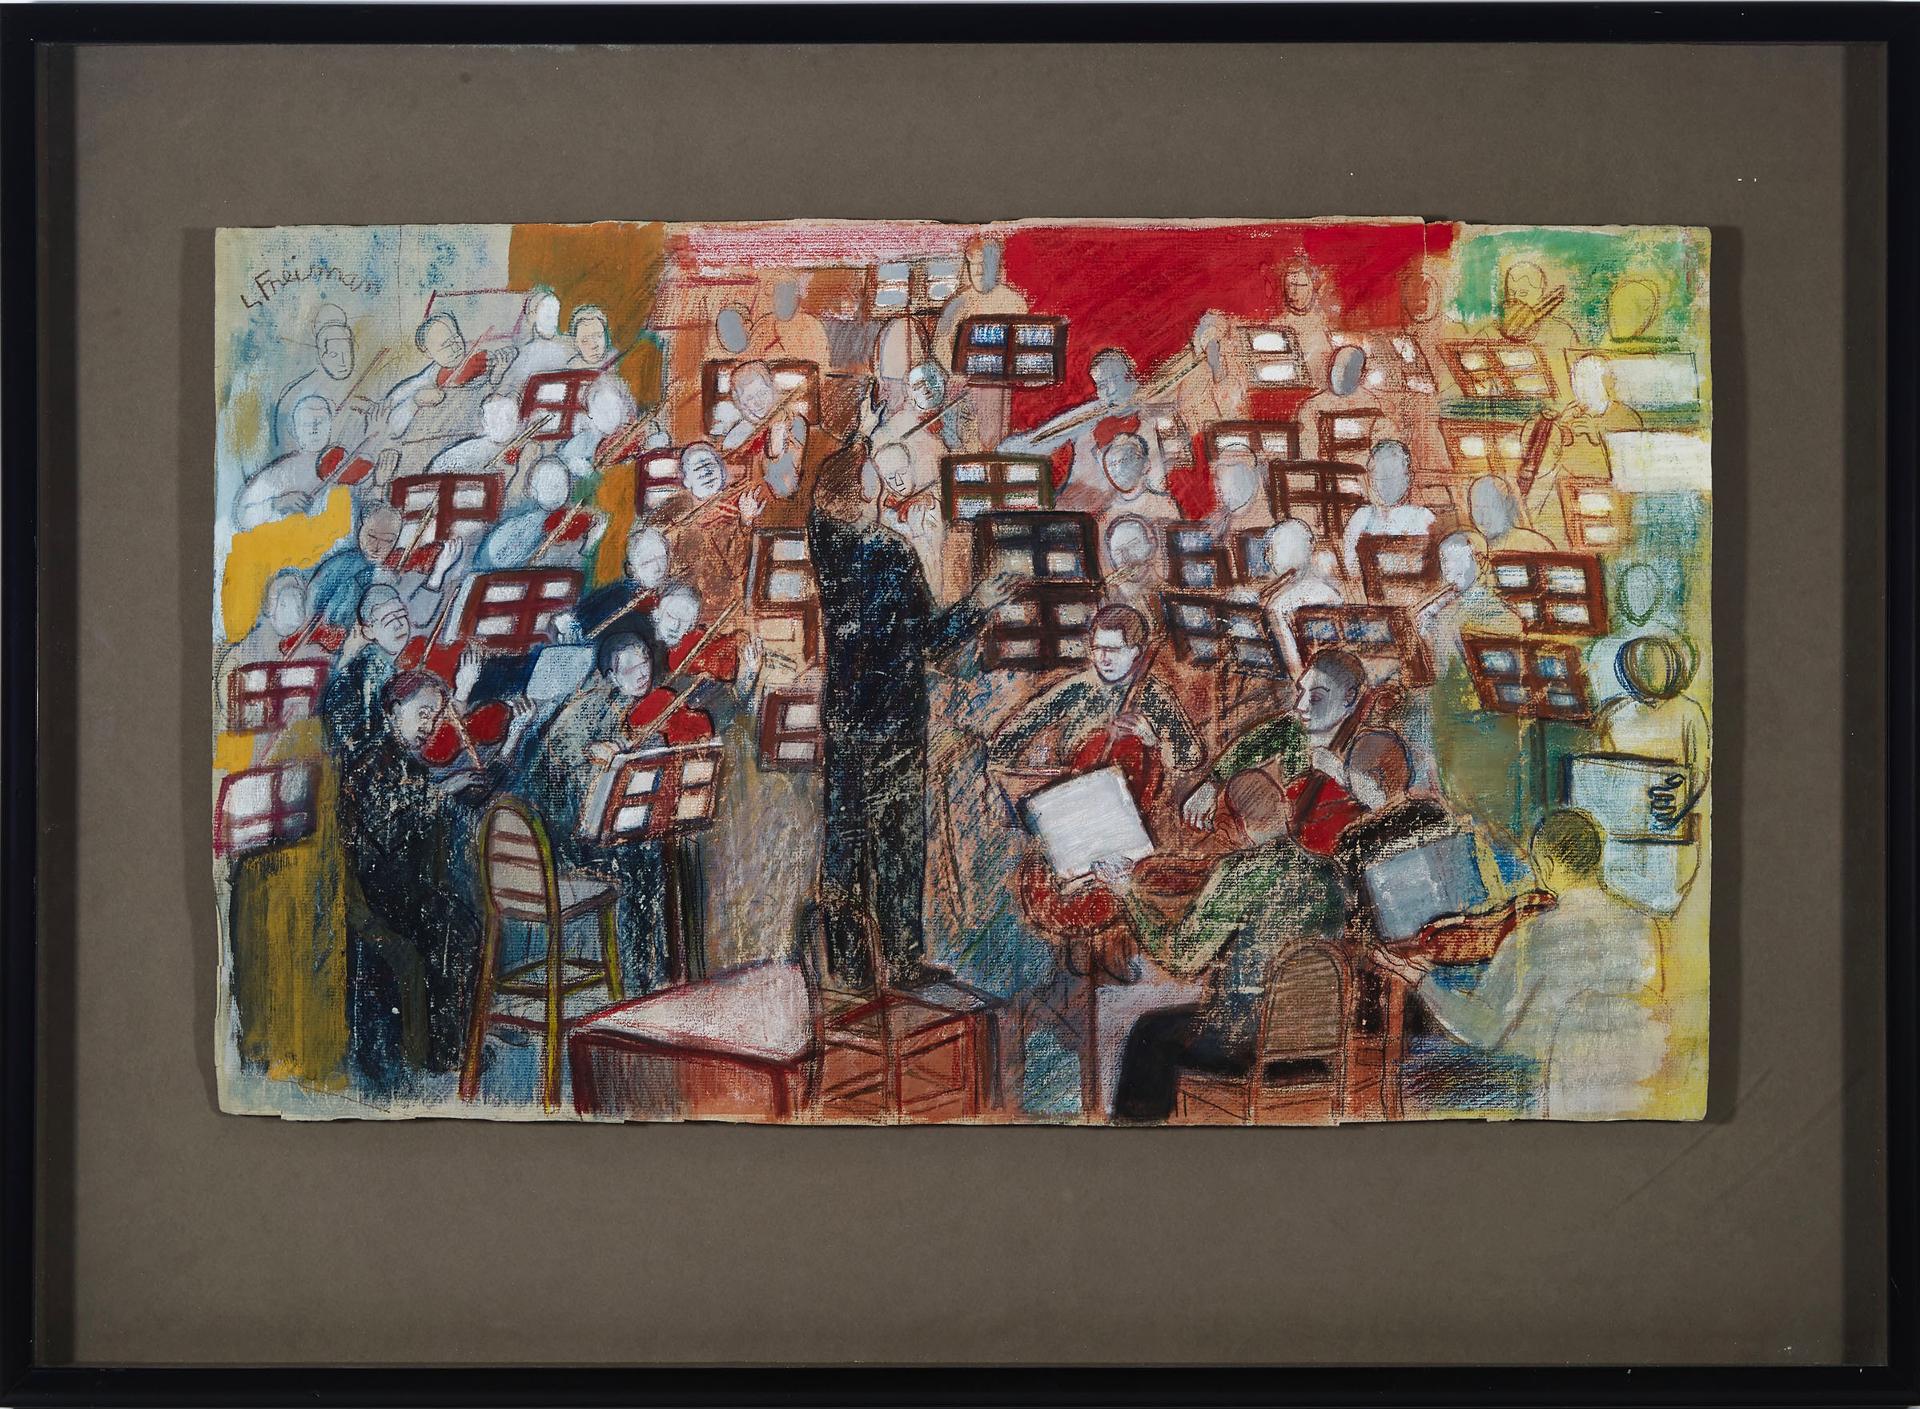 Lillian Freiman (1908-1986) - Untitled (The Conductor)